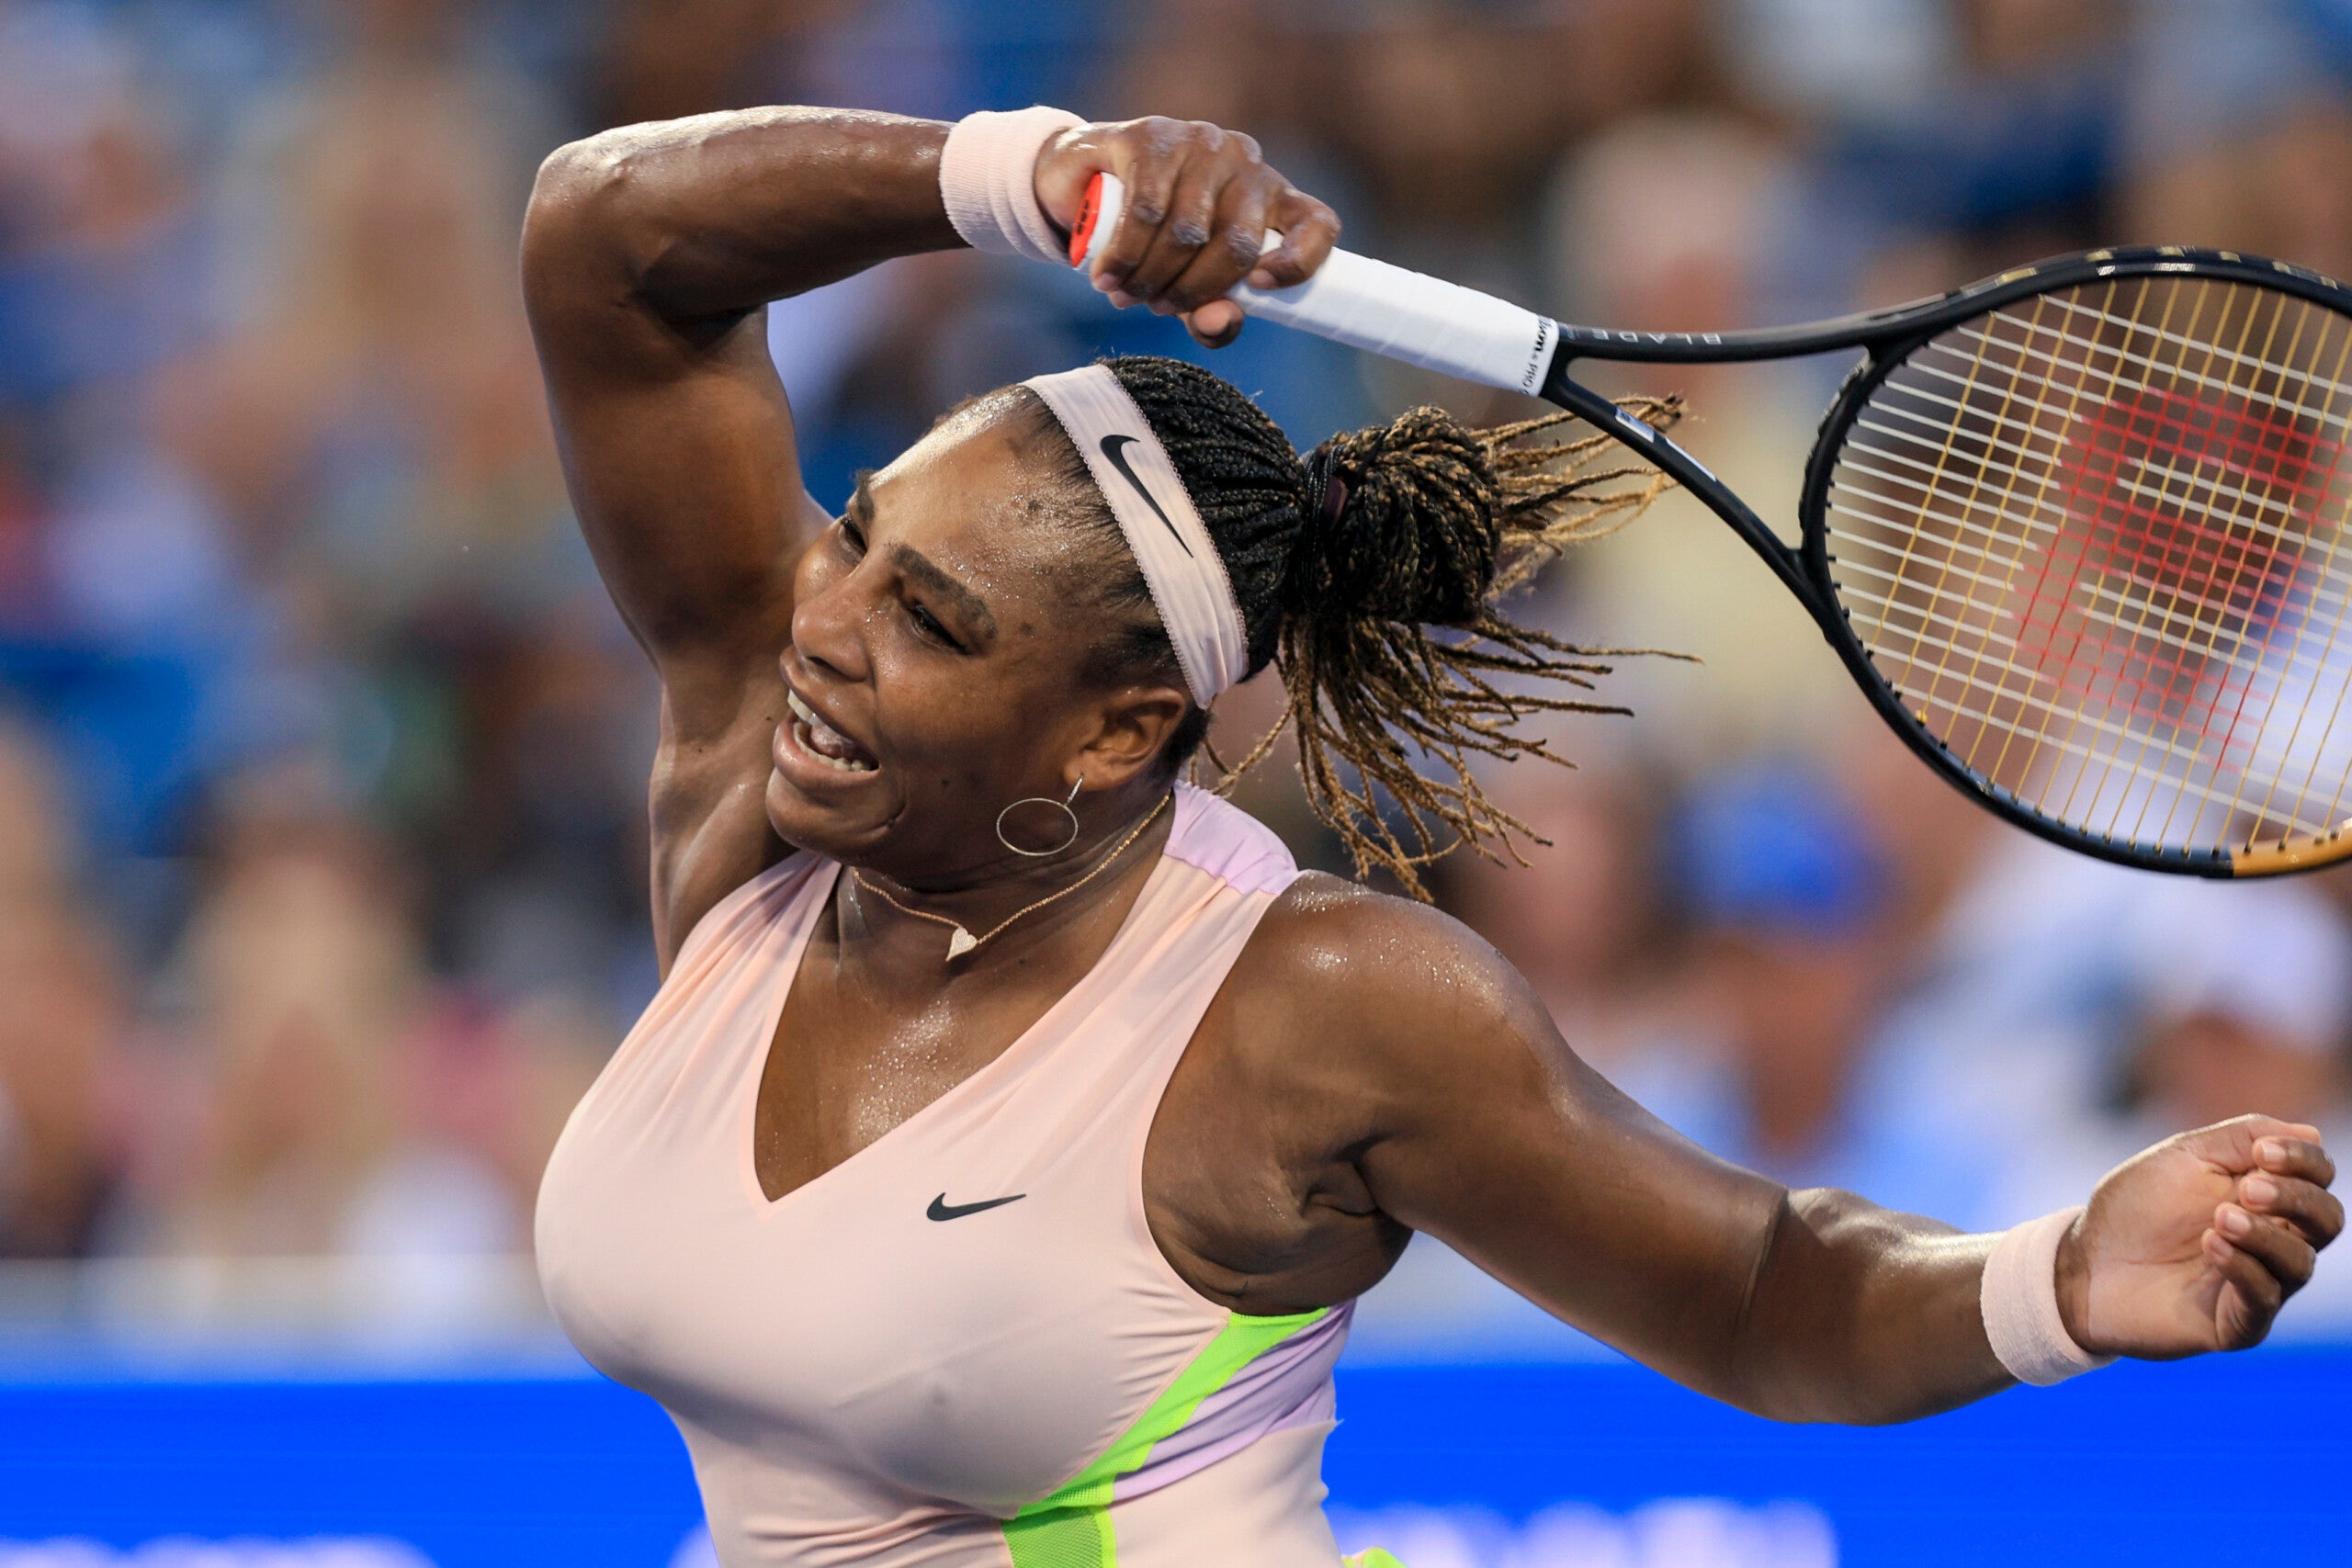 With Serena on at night, US Open begins